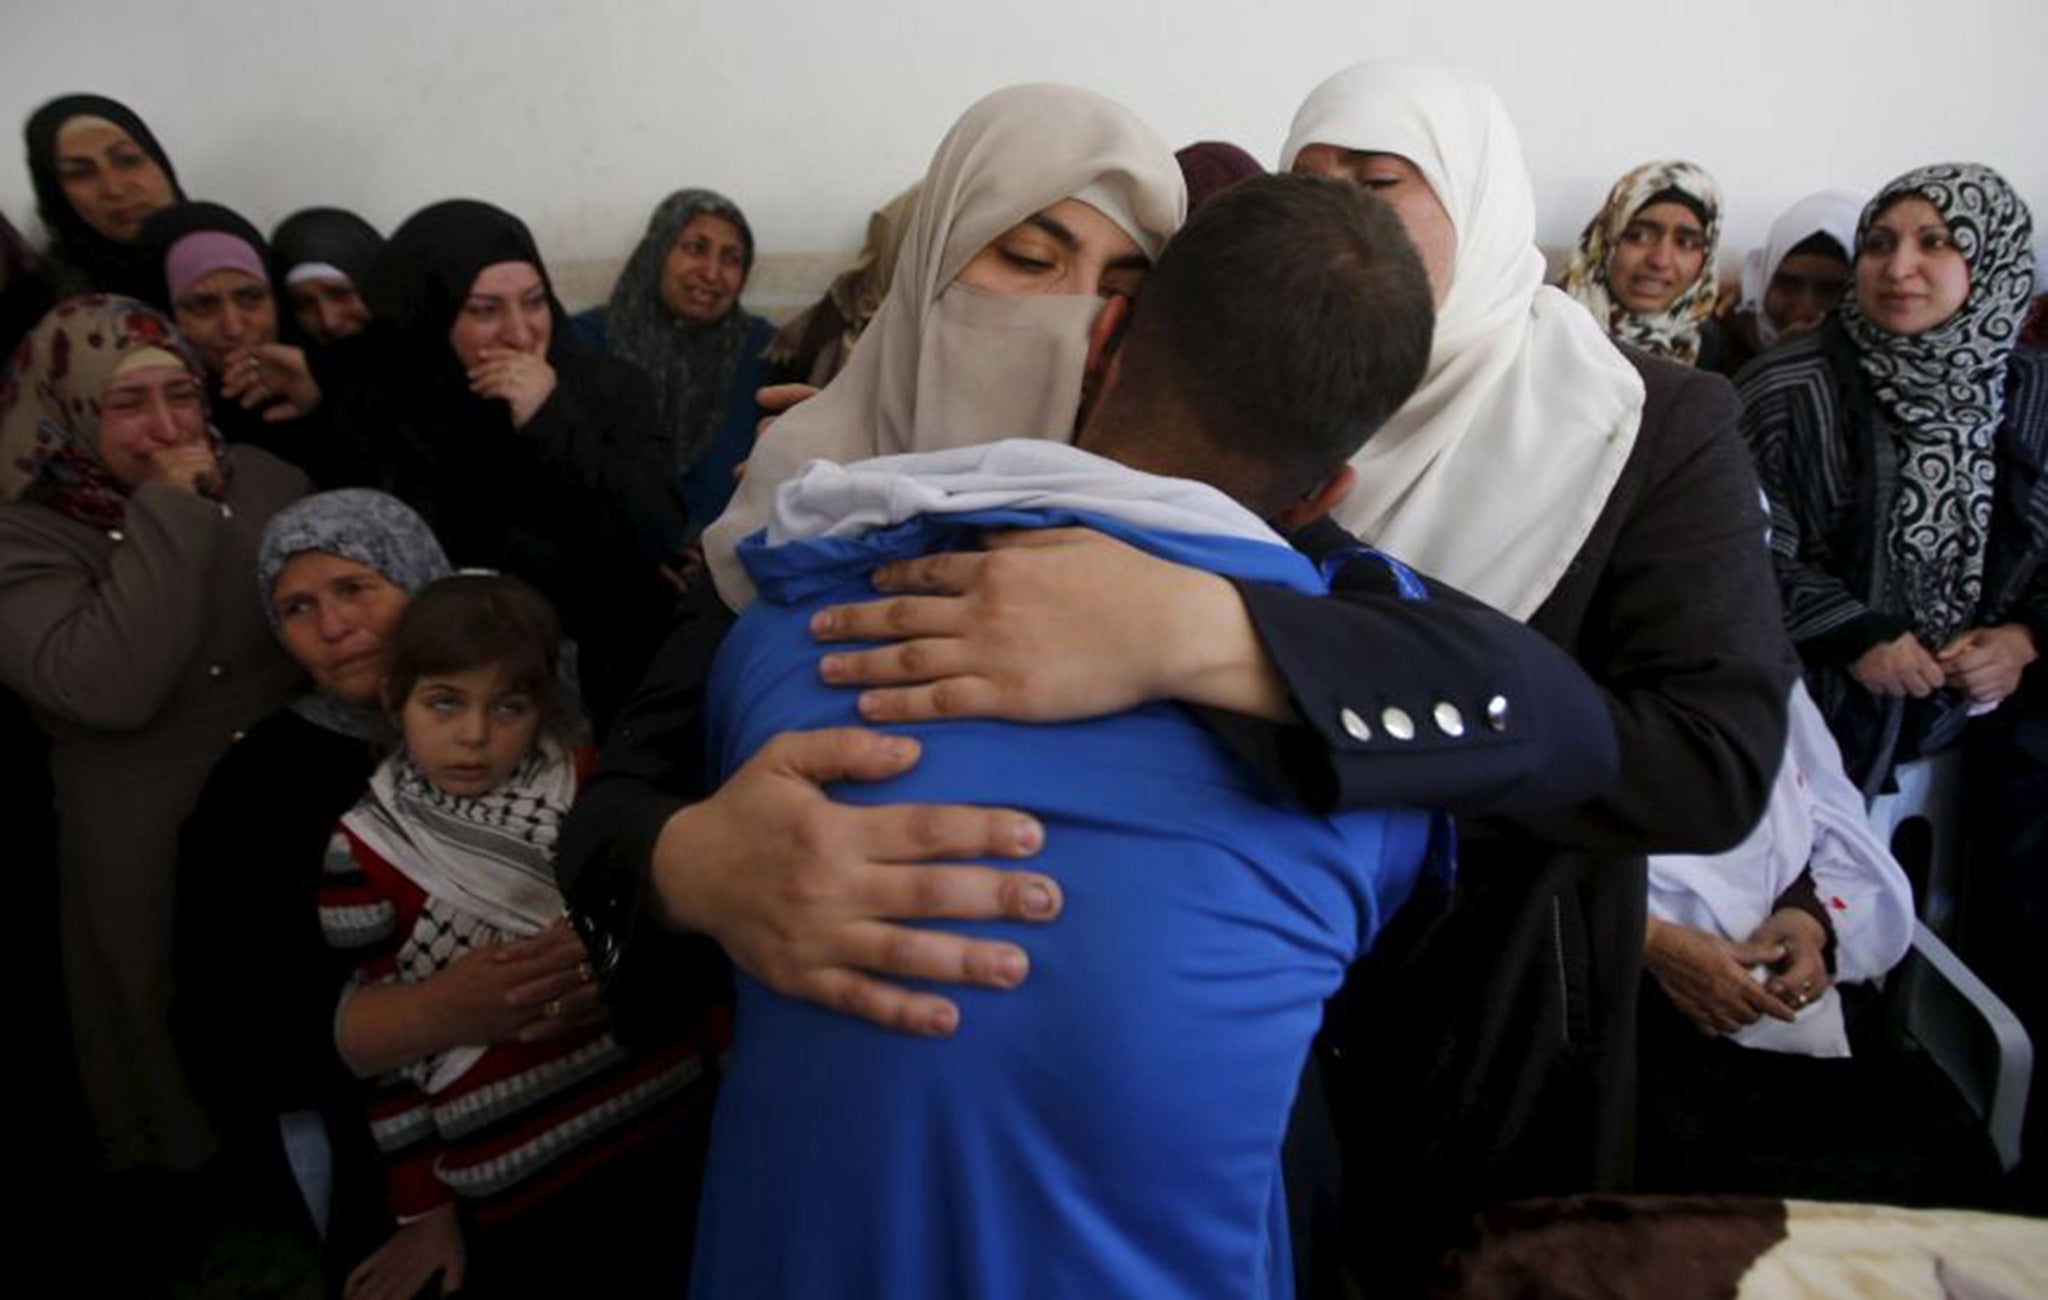 Relatives of Palestinian Abdullah al-Shalalda, who was killed by Israeli undercover forces during a raid at Al-Ahly hospital, mourn during his funeral in the West Bank village of Sair